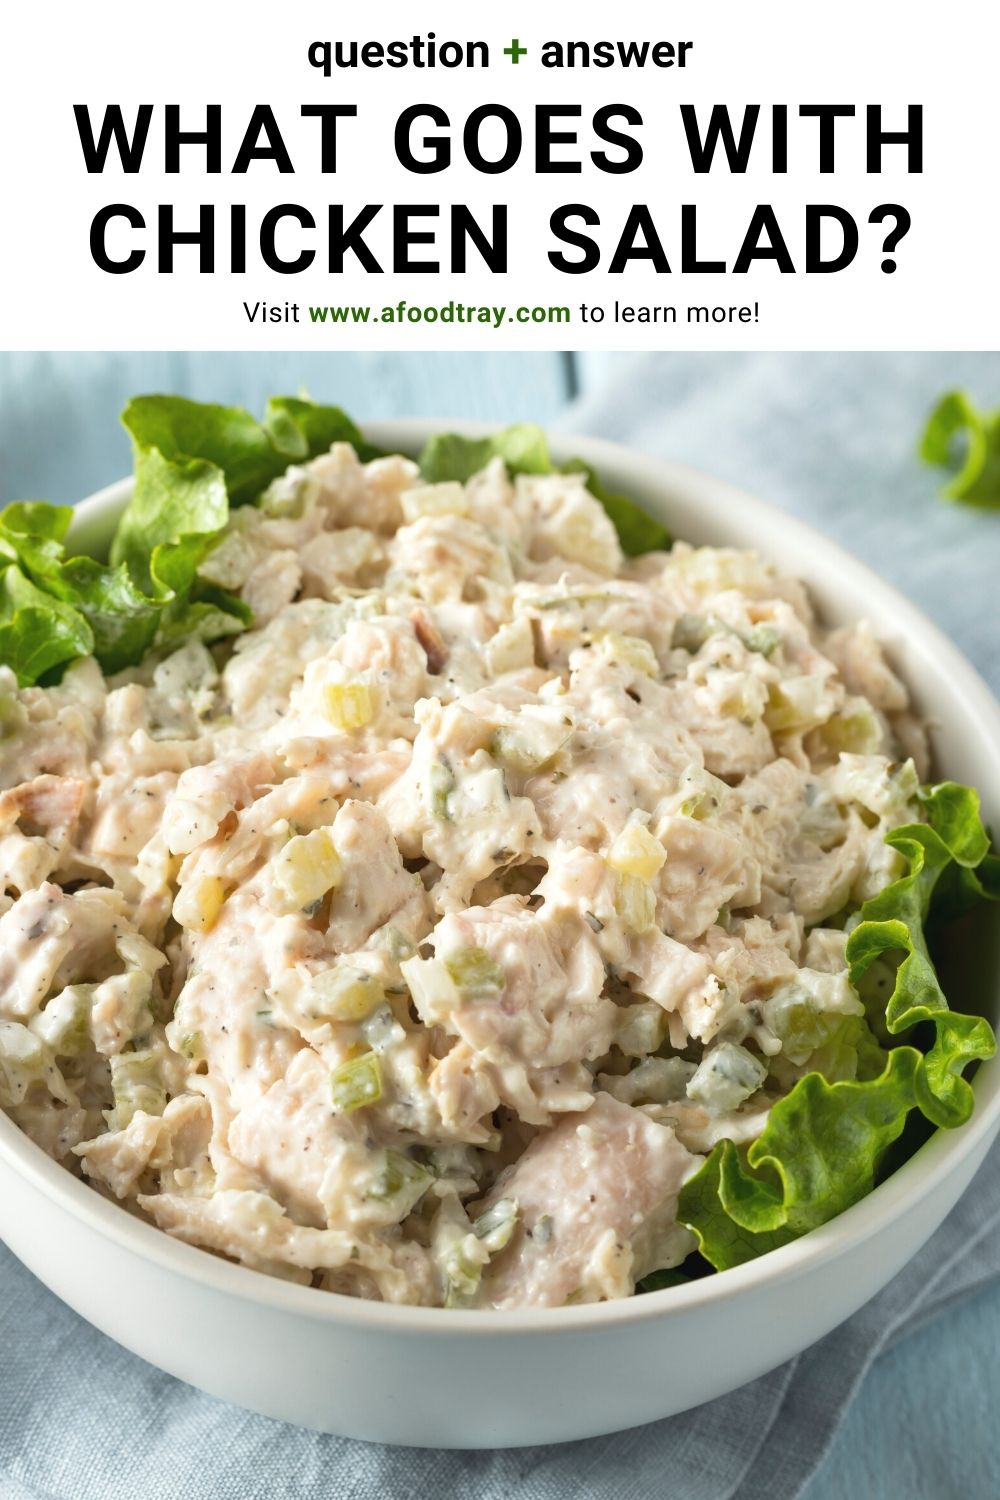 What goes with chicken salad